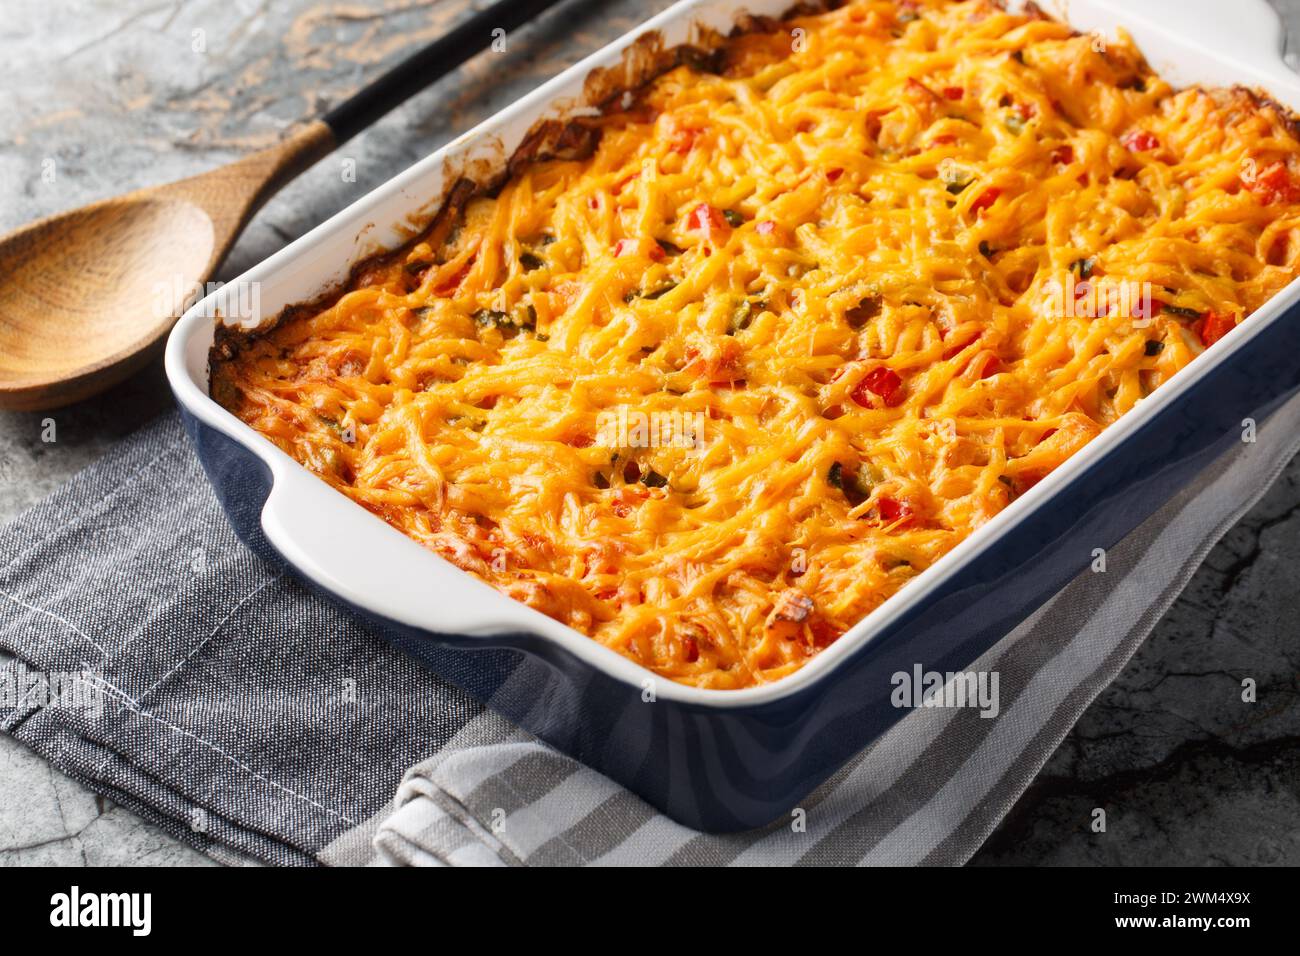 King Ranch Casserole is lined with corn tortillas, then layered with sauce and topped with cheese close-up in a baking dish on a marble table. Horizon Stock Photo